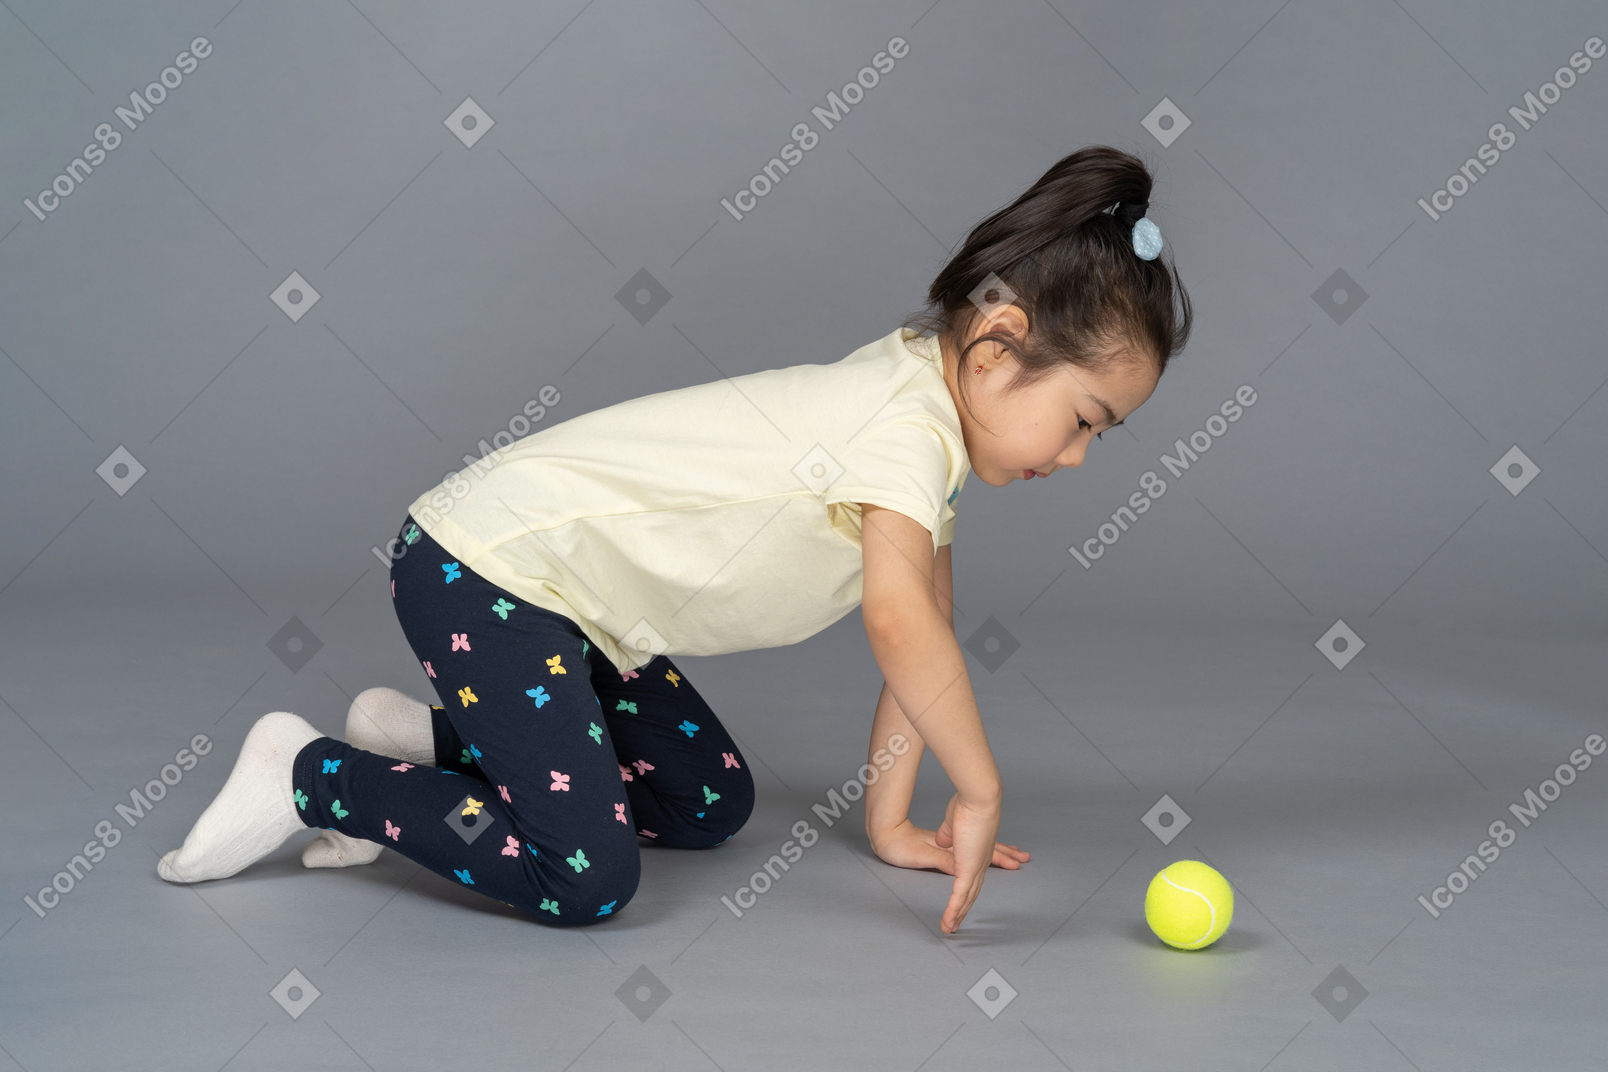 Girl on all fours playing with a tennis ball